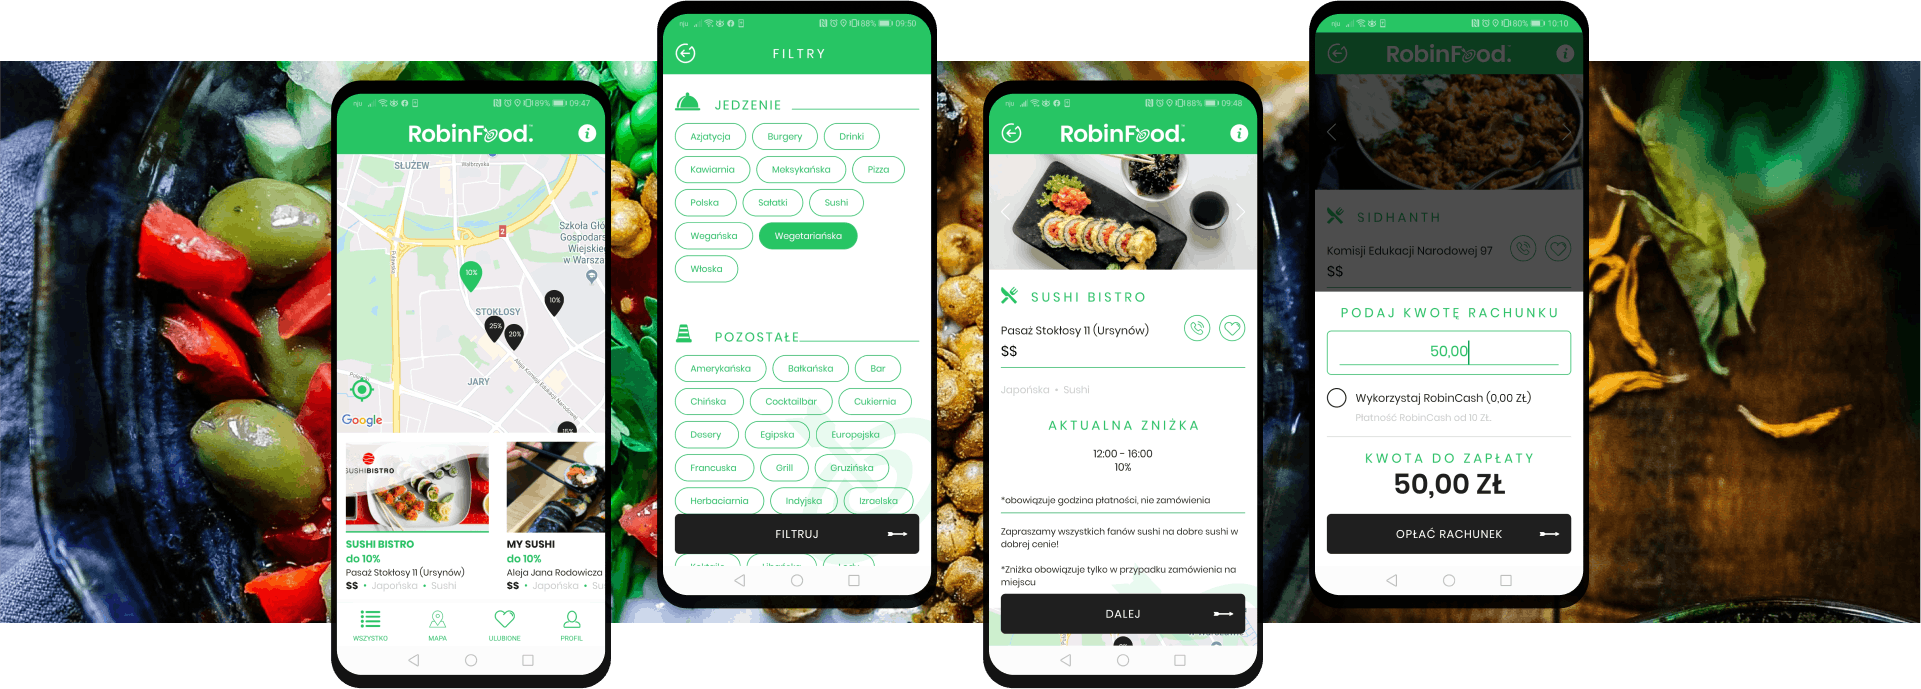 Graphic showing feautures of RobinFood mobile app